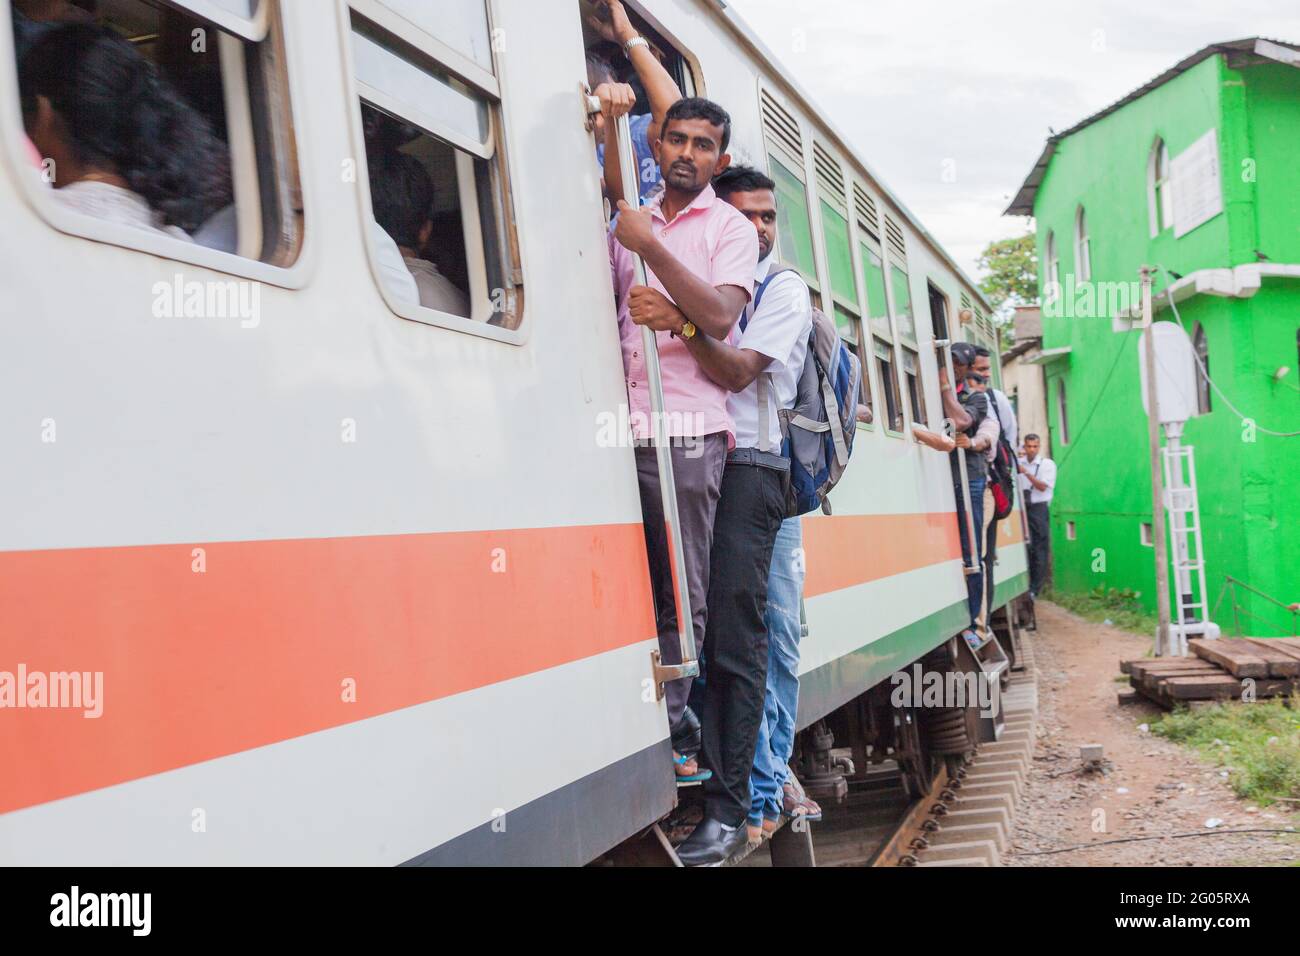 Unidentified Passengers Standing on the Doors of Running Local Train during  Rush Hours Editorial Photography - Image of station, india: 168031082